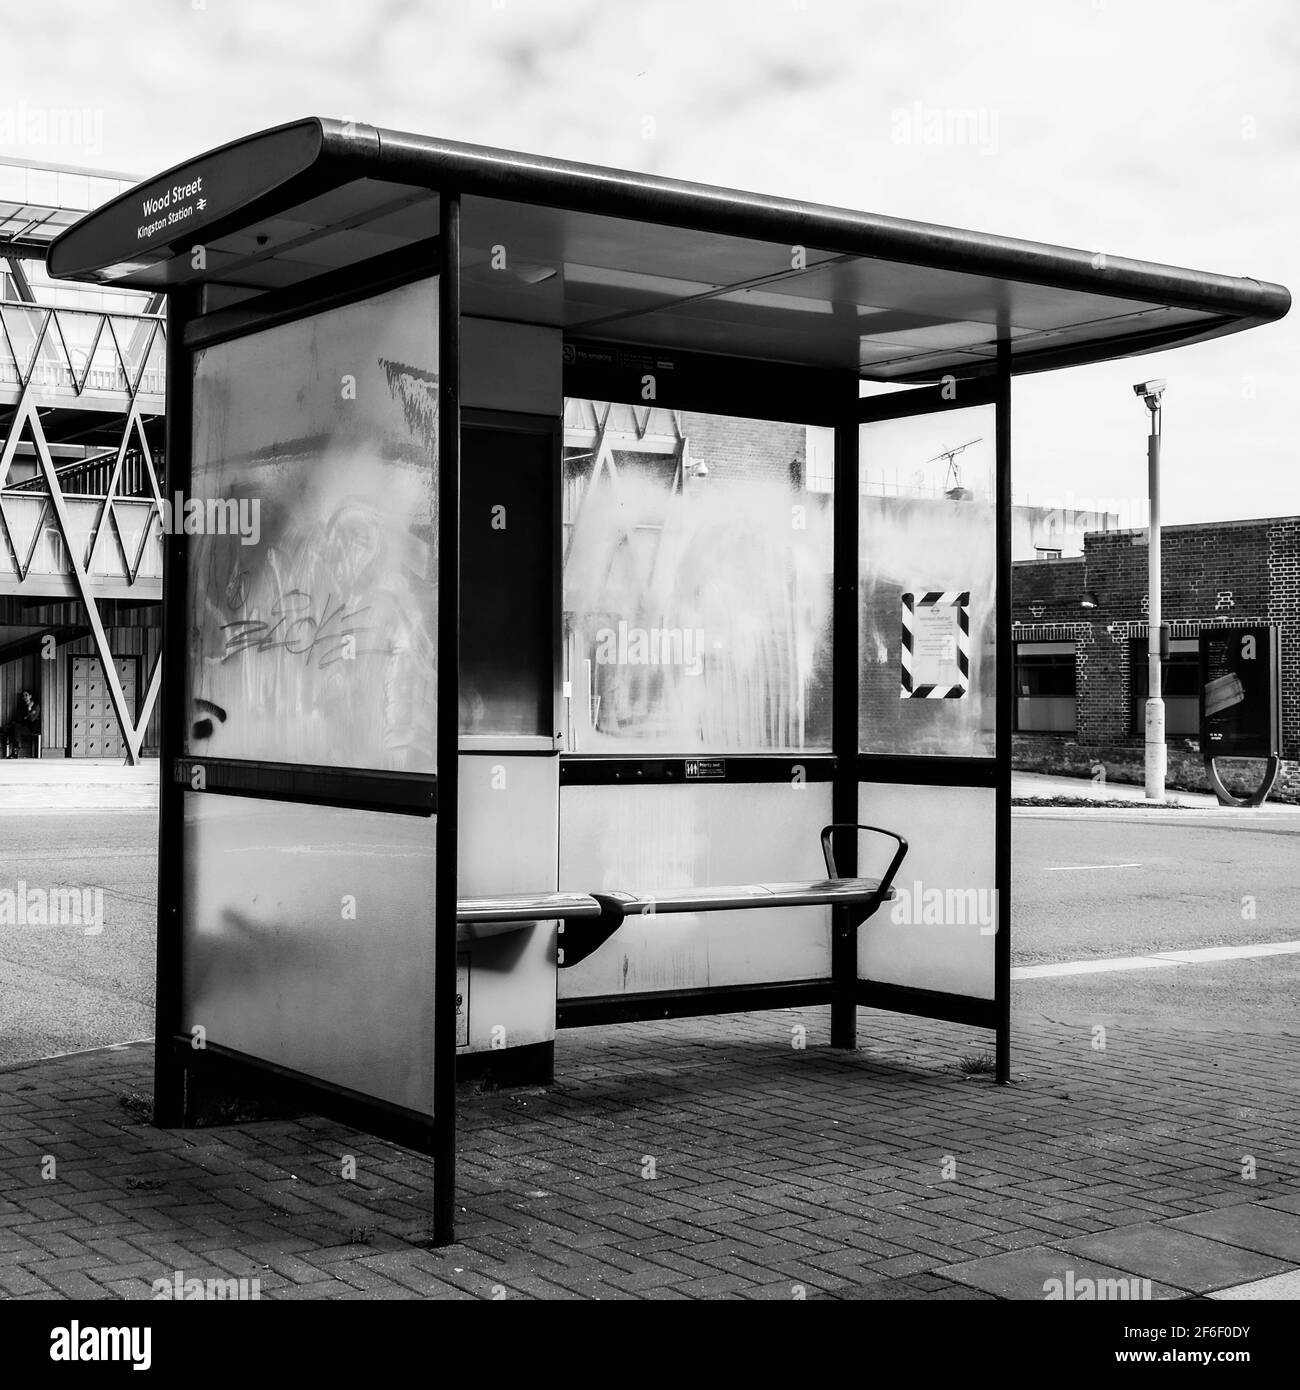 Black And White Image Of A Modern Public Bus Stop Shelter Adn Seating With No People Stock Photo